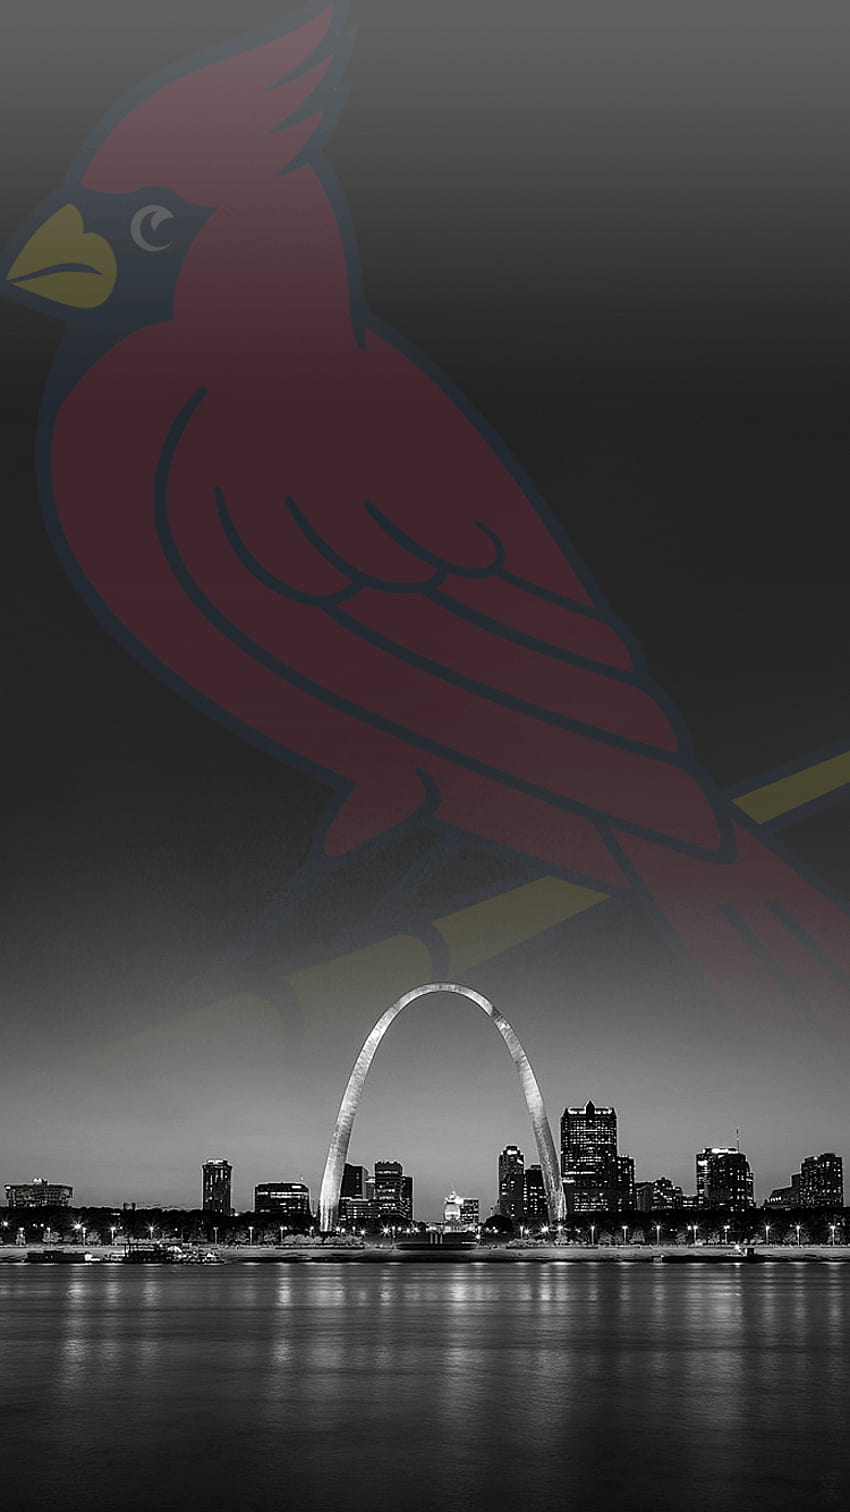 St louis cardinals iphone HD wallpapers